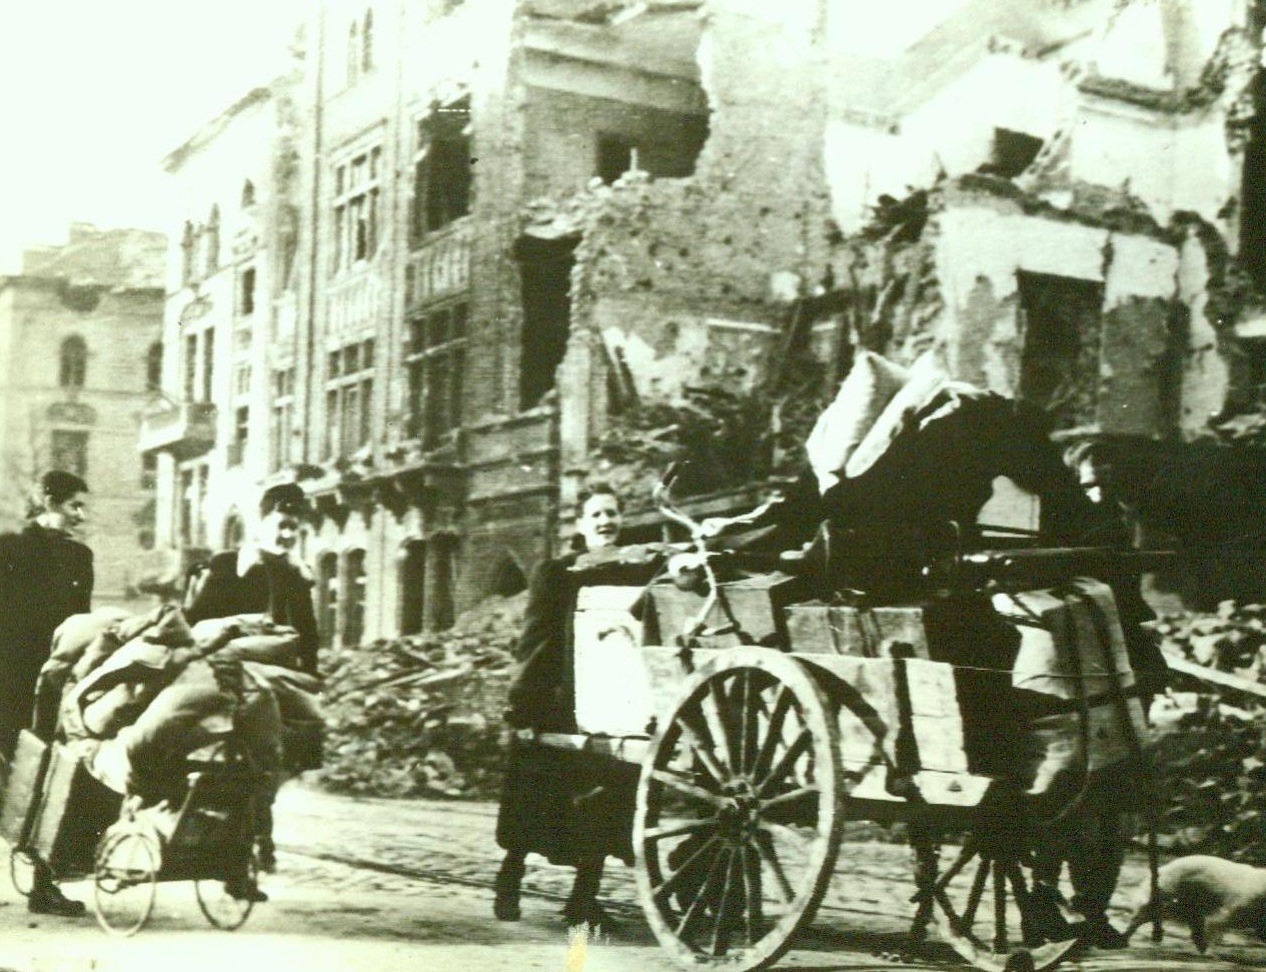 Refugees Flee Aachen, 10/16/1944. Aachen, German – Pushing carts piled high with their few salvaged belongings, German women flee doomed Aachen. The refugees pass through a ruined street, walking past shell and bomb-torn buildings. 10/16/44 (ACME);